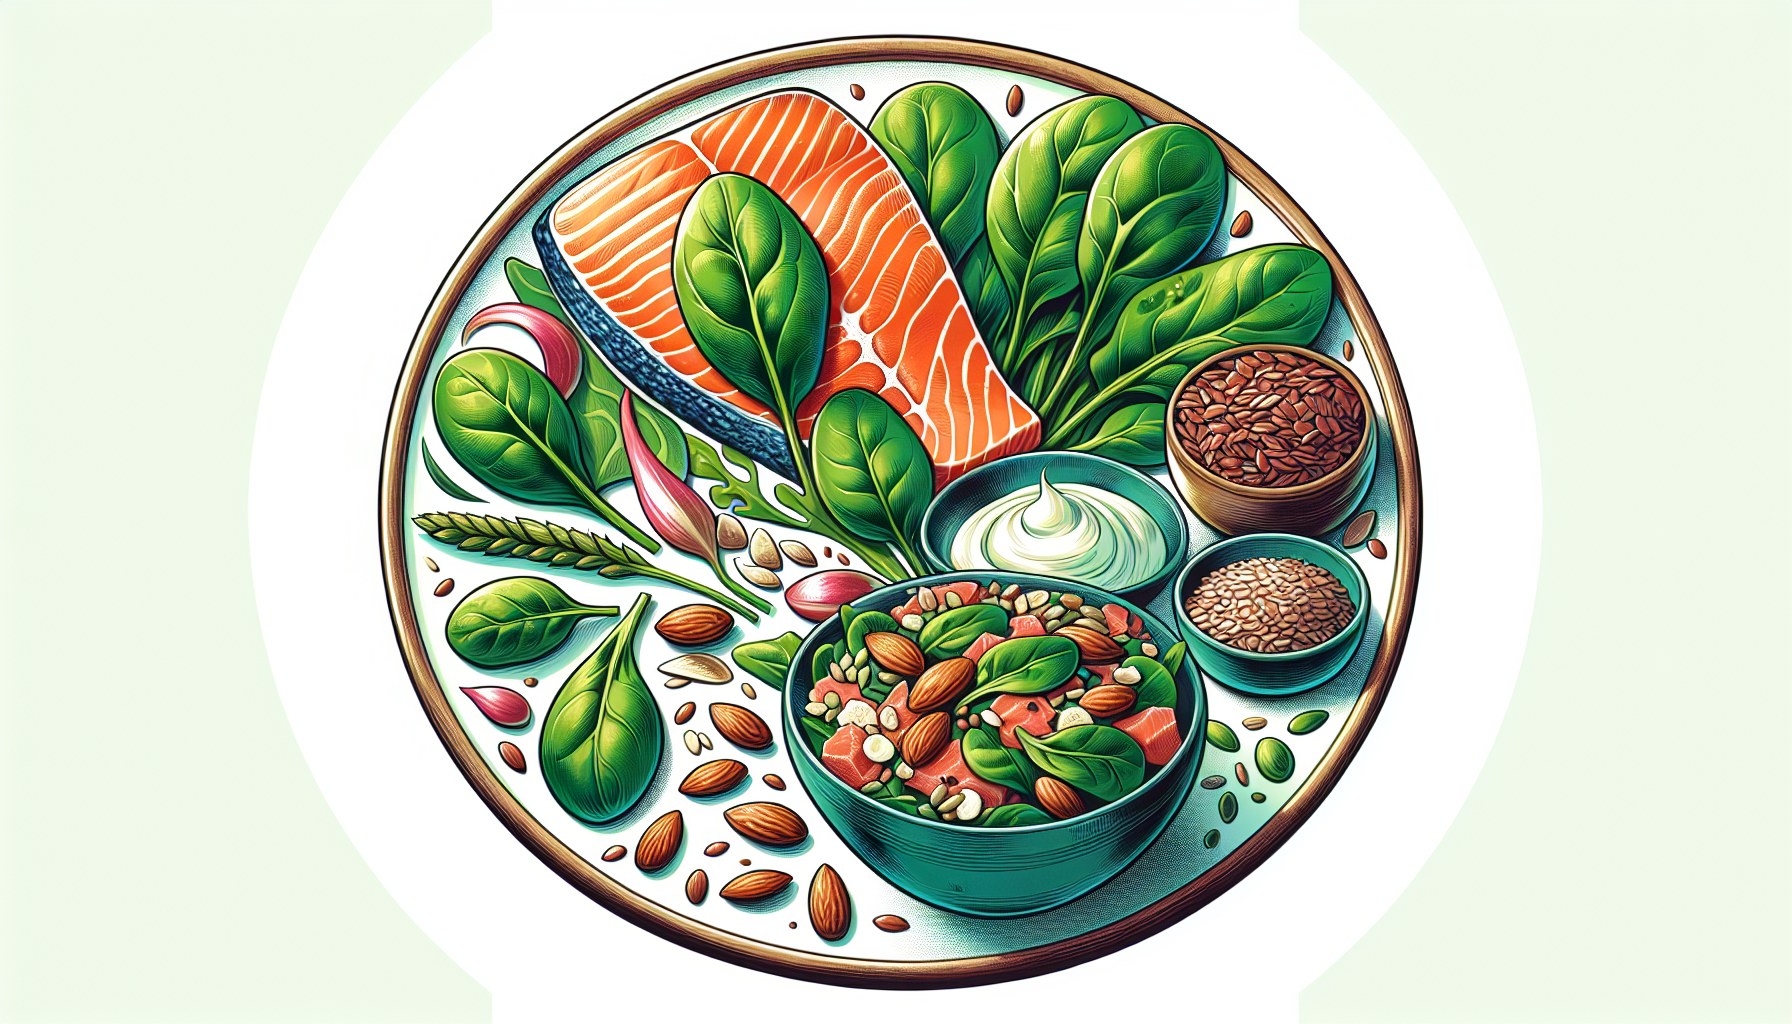 Illustration of a plate with various foods rich in magnesium